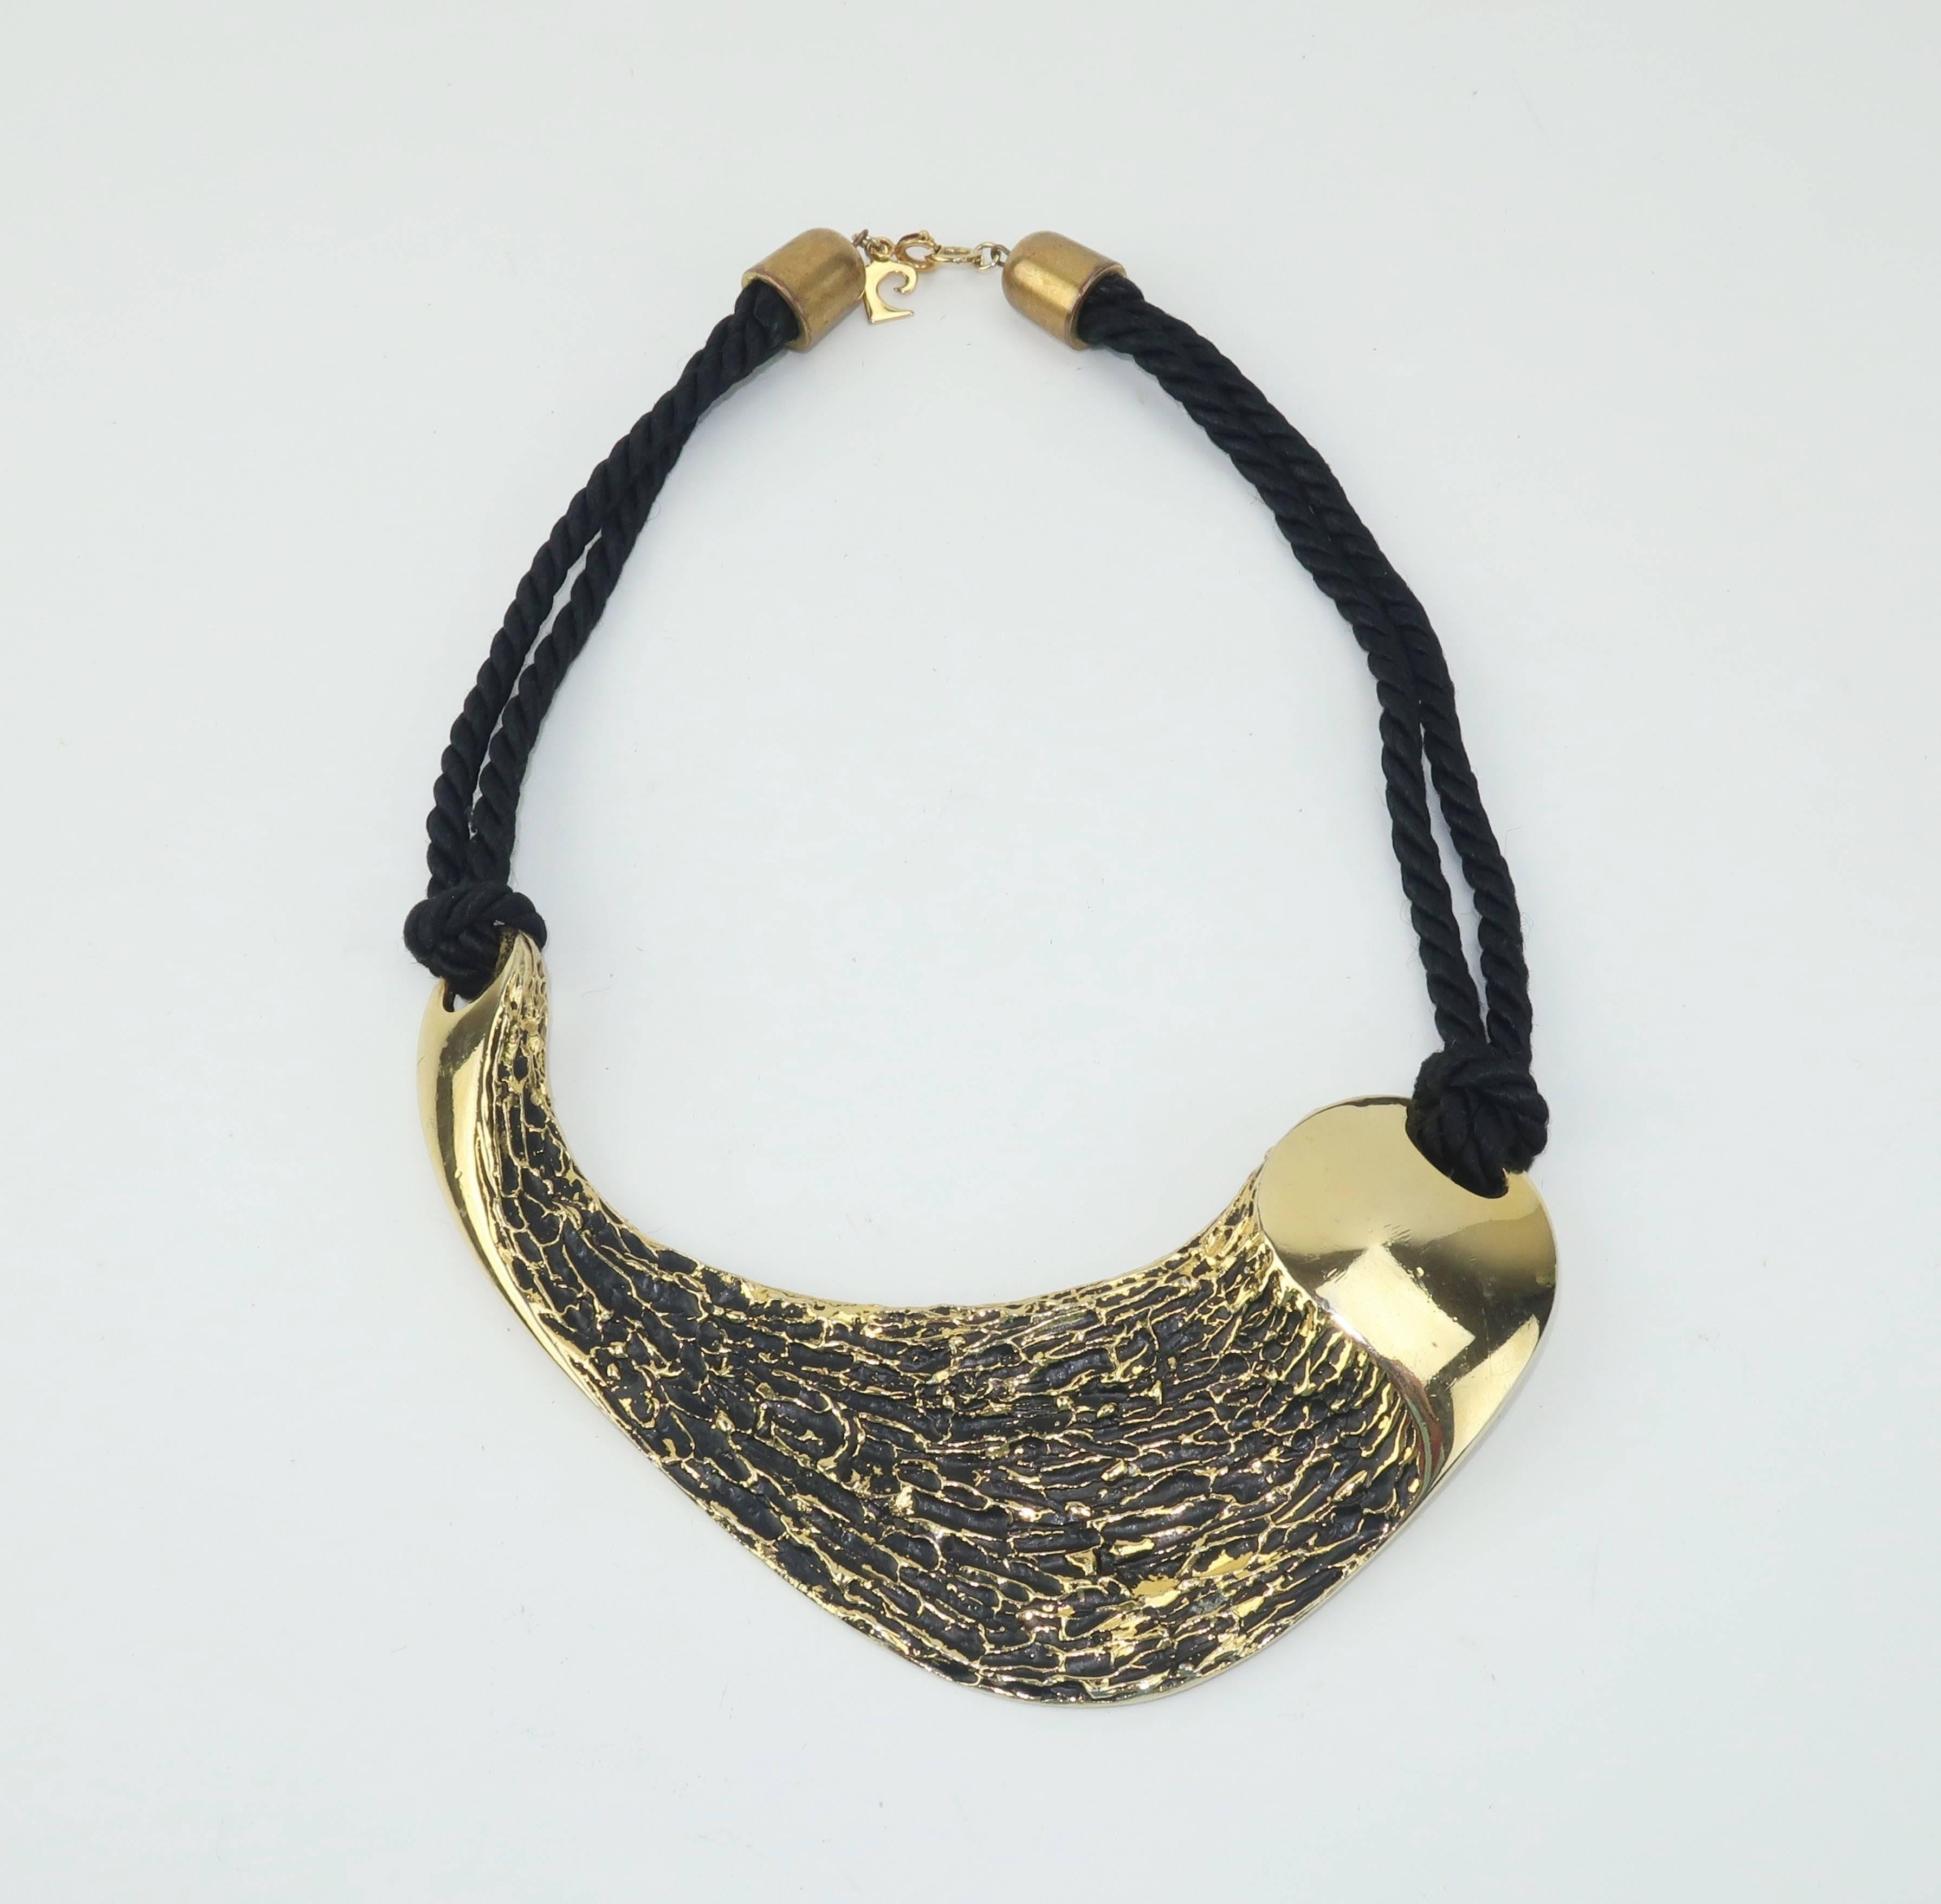 Pierre Cardin's designs from the 1960's and 1970’s are the epitome of the mod and futuristic vision of the time. This sculptural gold tone necklace has a brutalist aesthestic that is the perfect contrasting compliment to the feminine form.  The